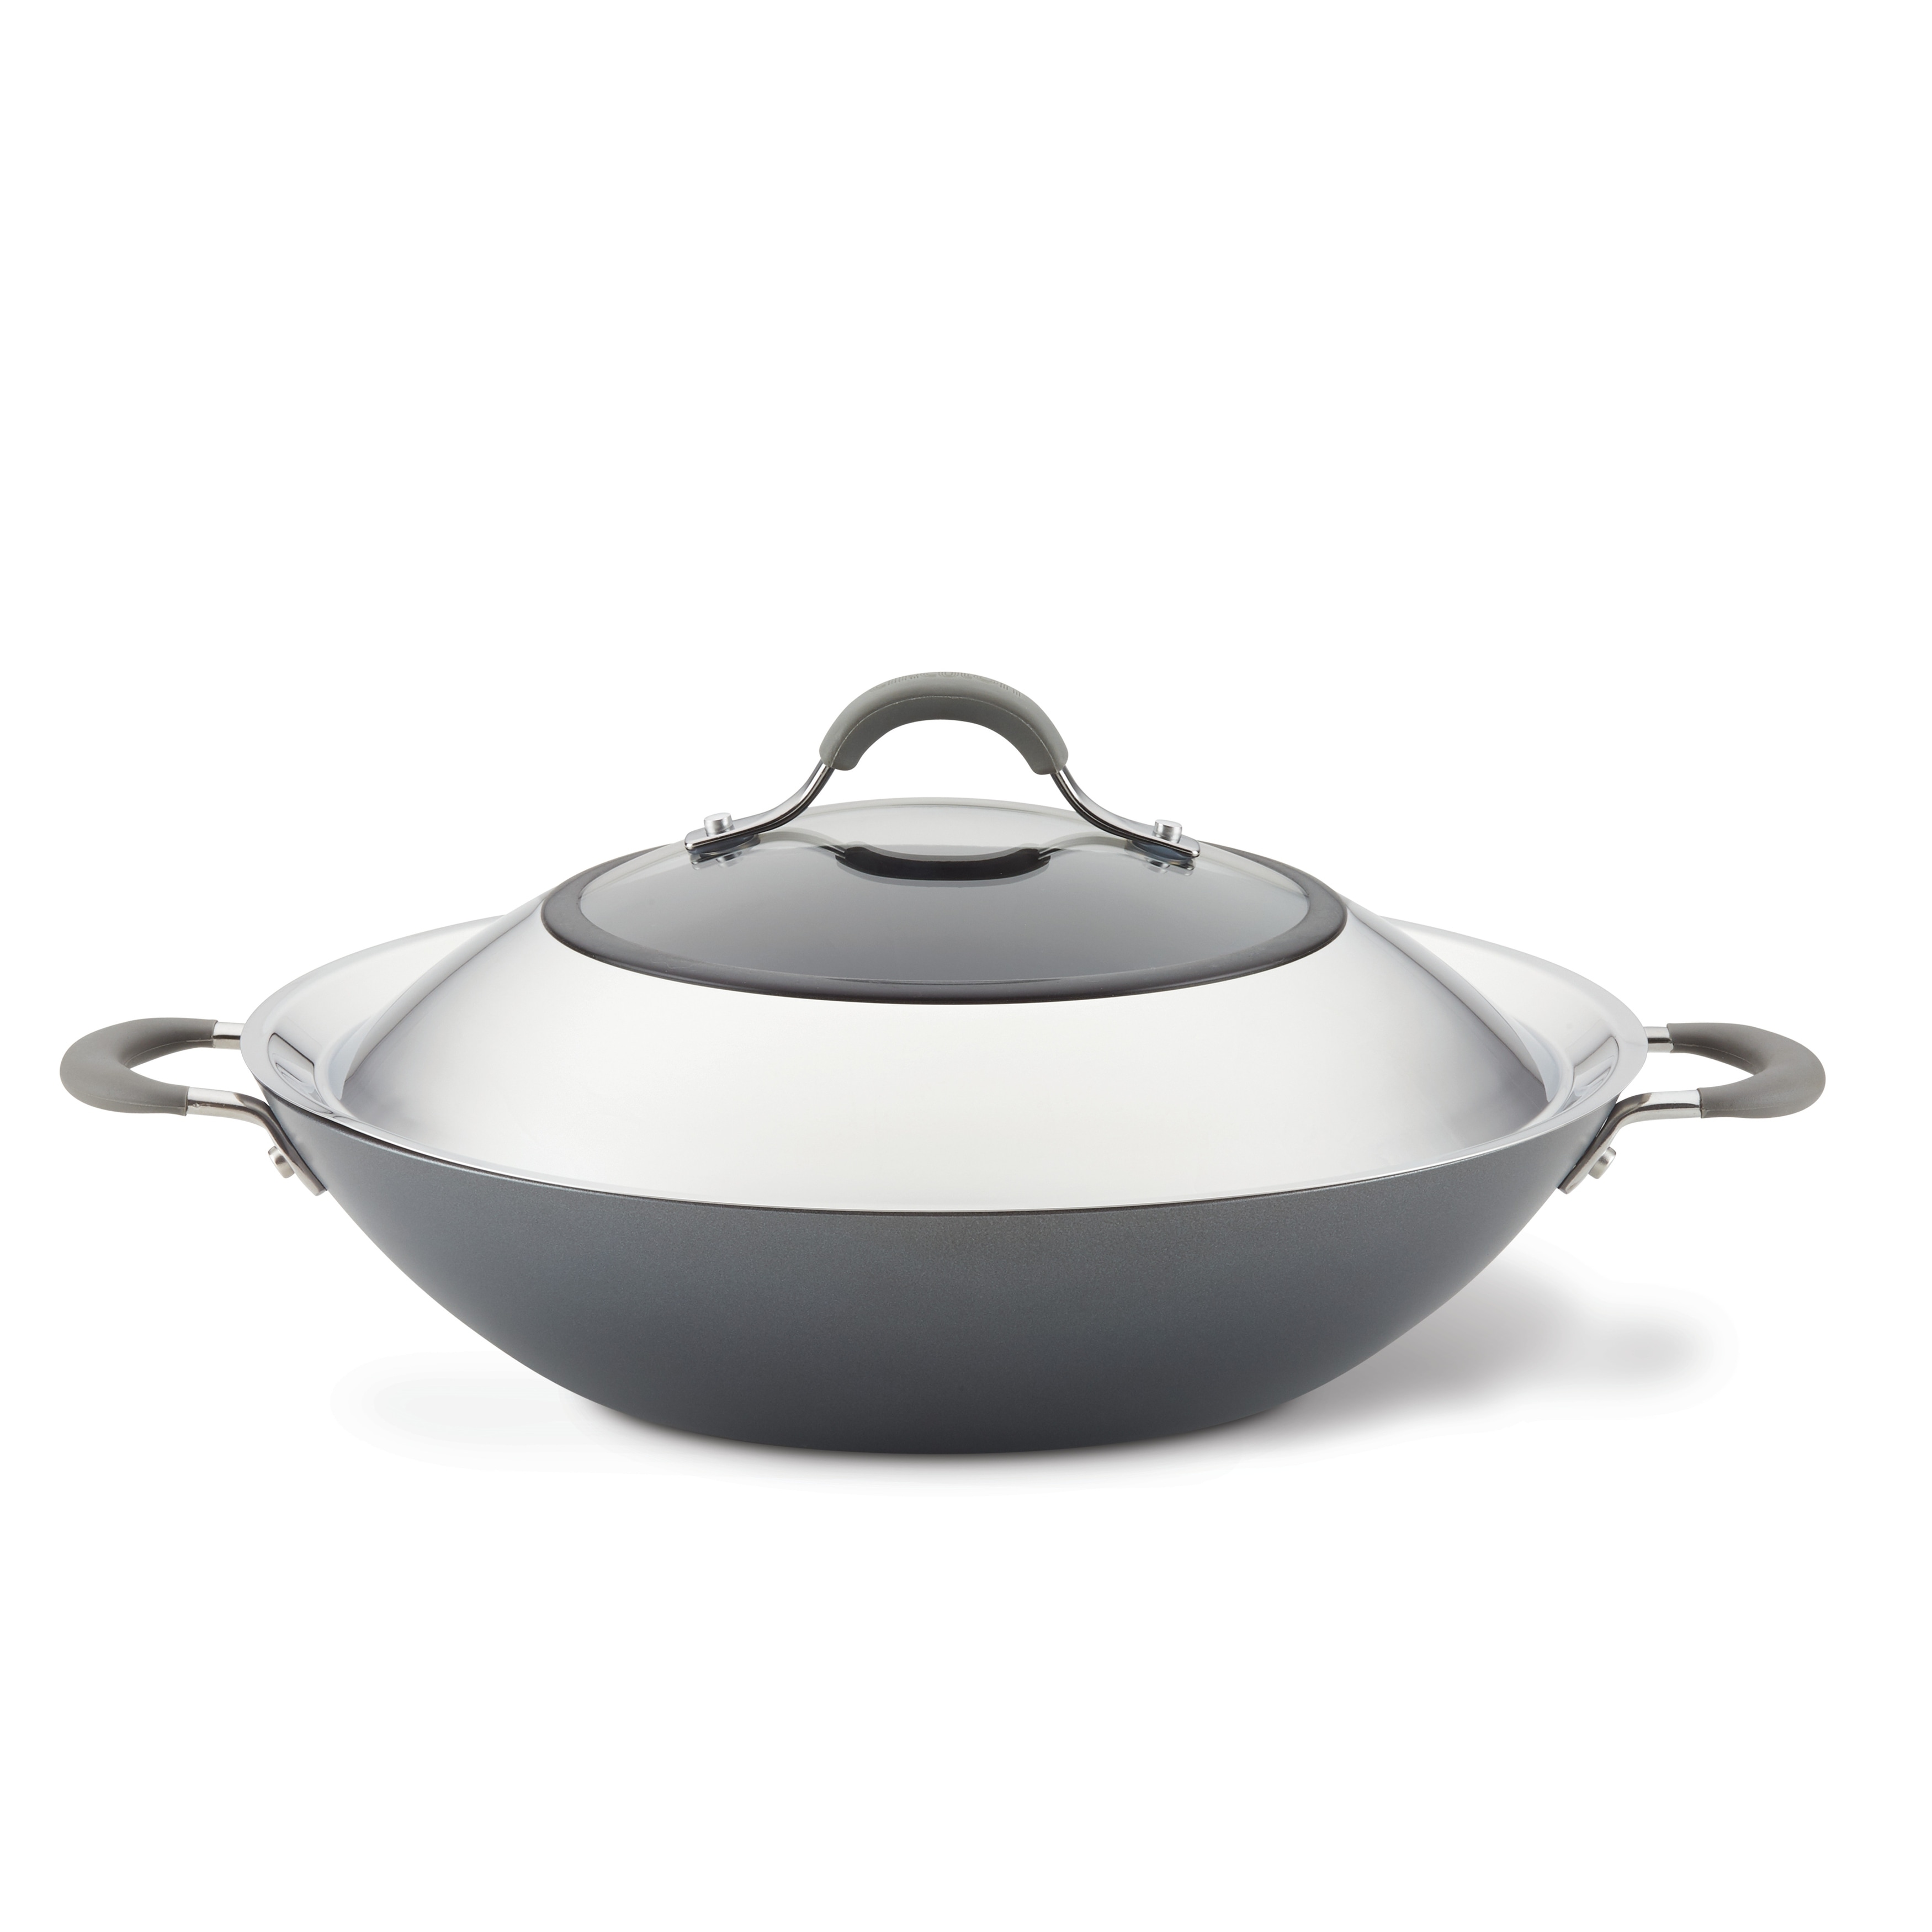 https://ak1.ostkcdn.com/images/products/is/images/direct/ab975757e042c131587bb4e55ff092fce1657bd0/Circulon-Elementum-Hard-Anodized-Nonstick-Wok-with-Side-Handles-and-Lid%2C-14-Inch%2C-Oyster-Gray.jpg